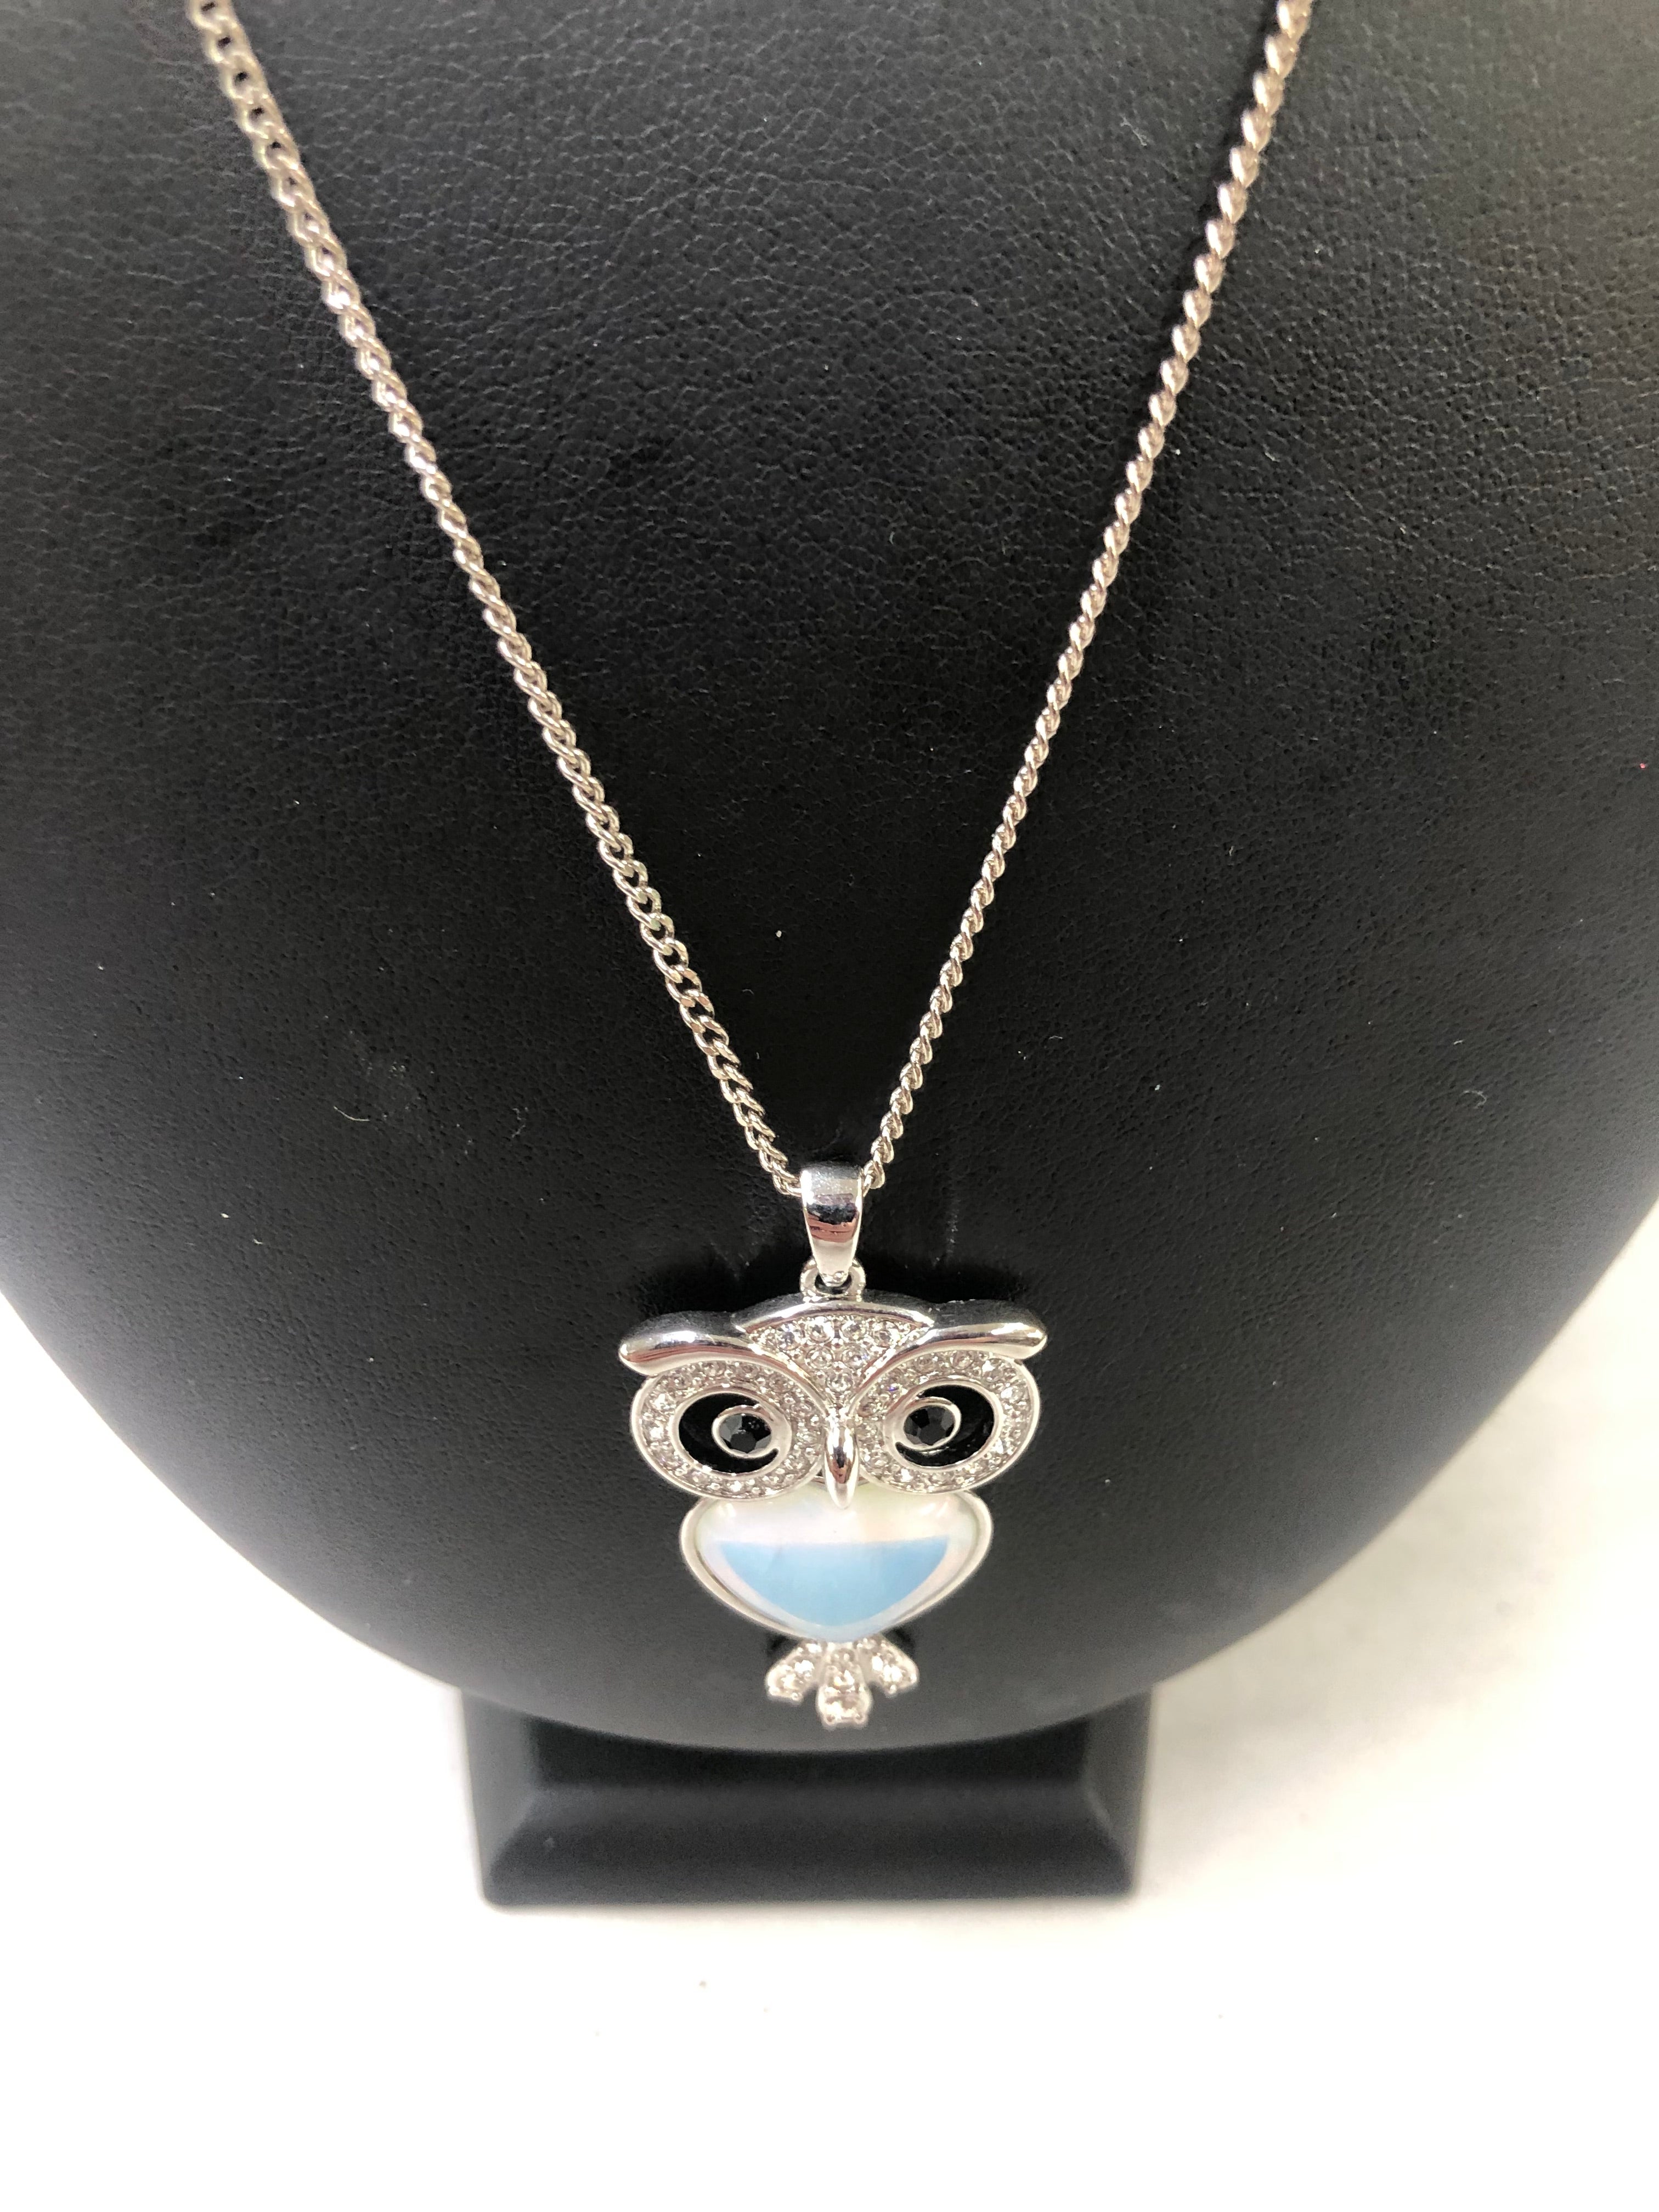 Moonstone Owl necklace